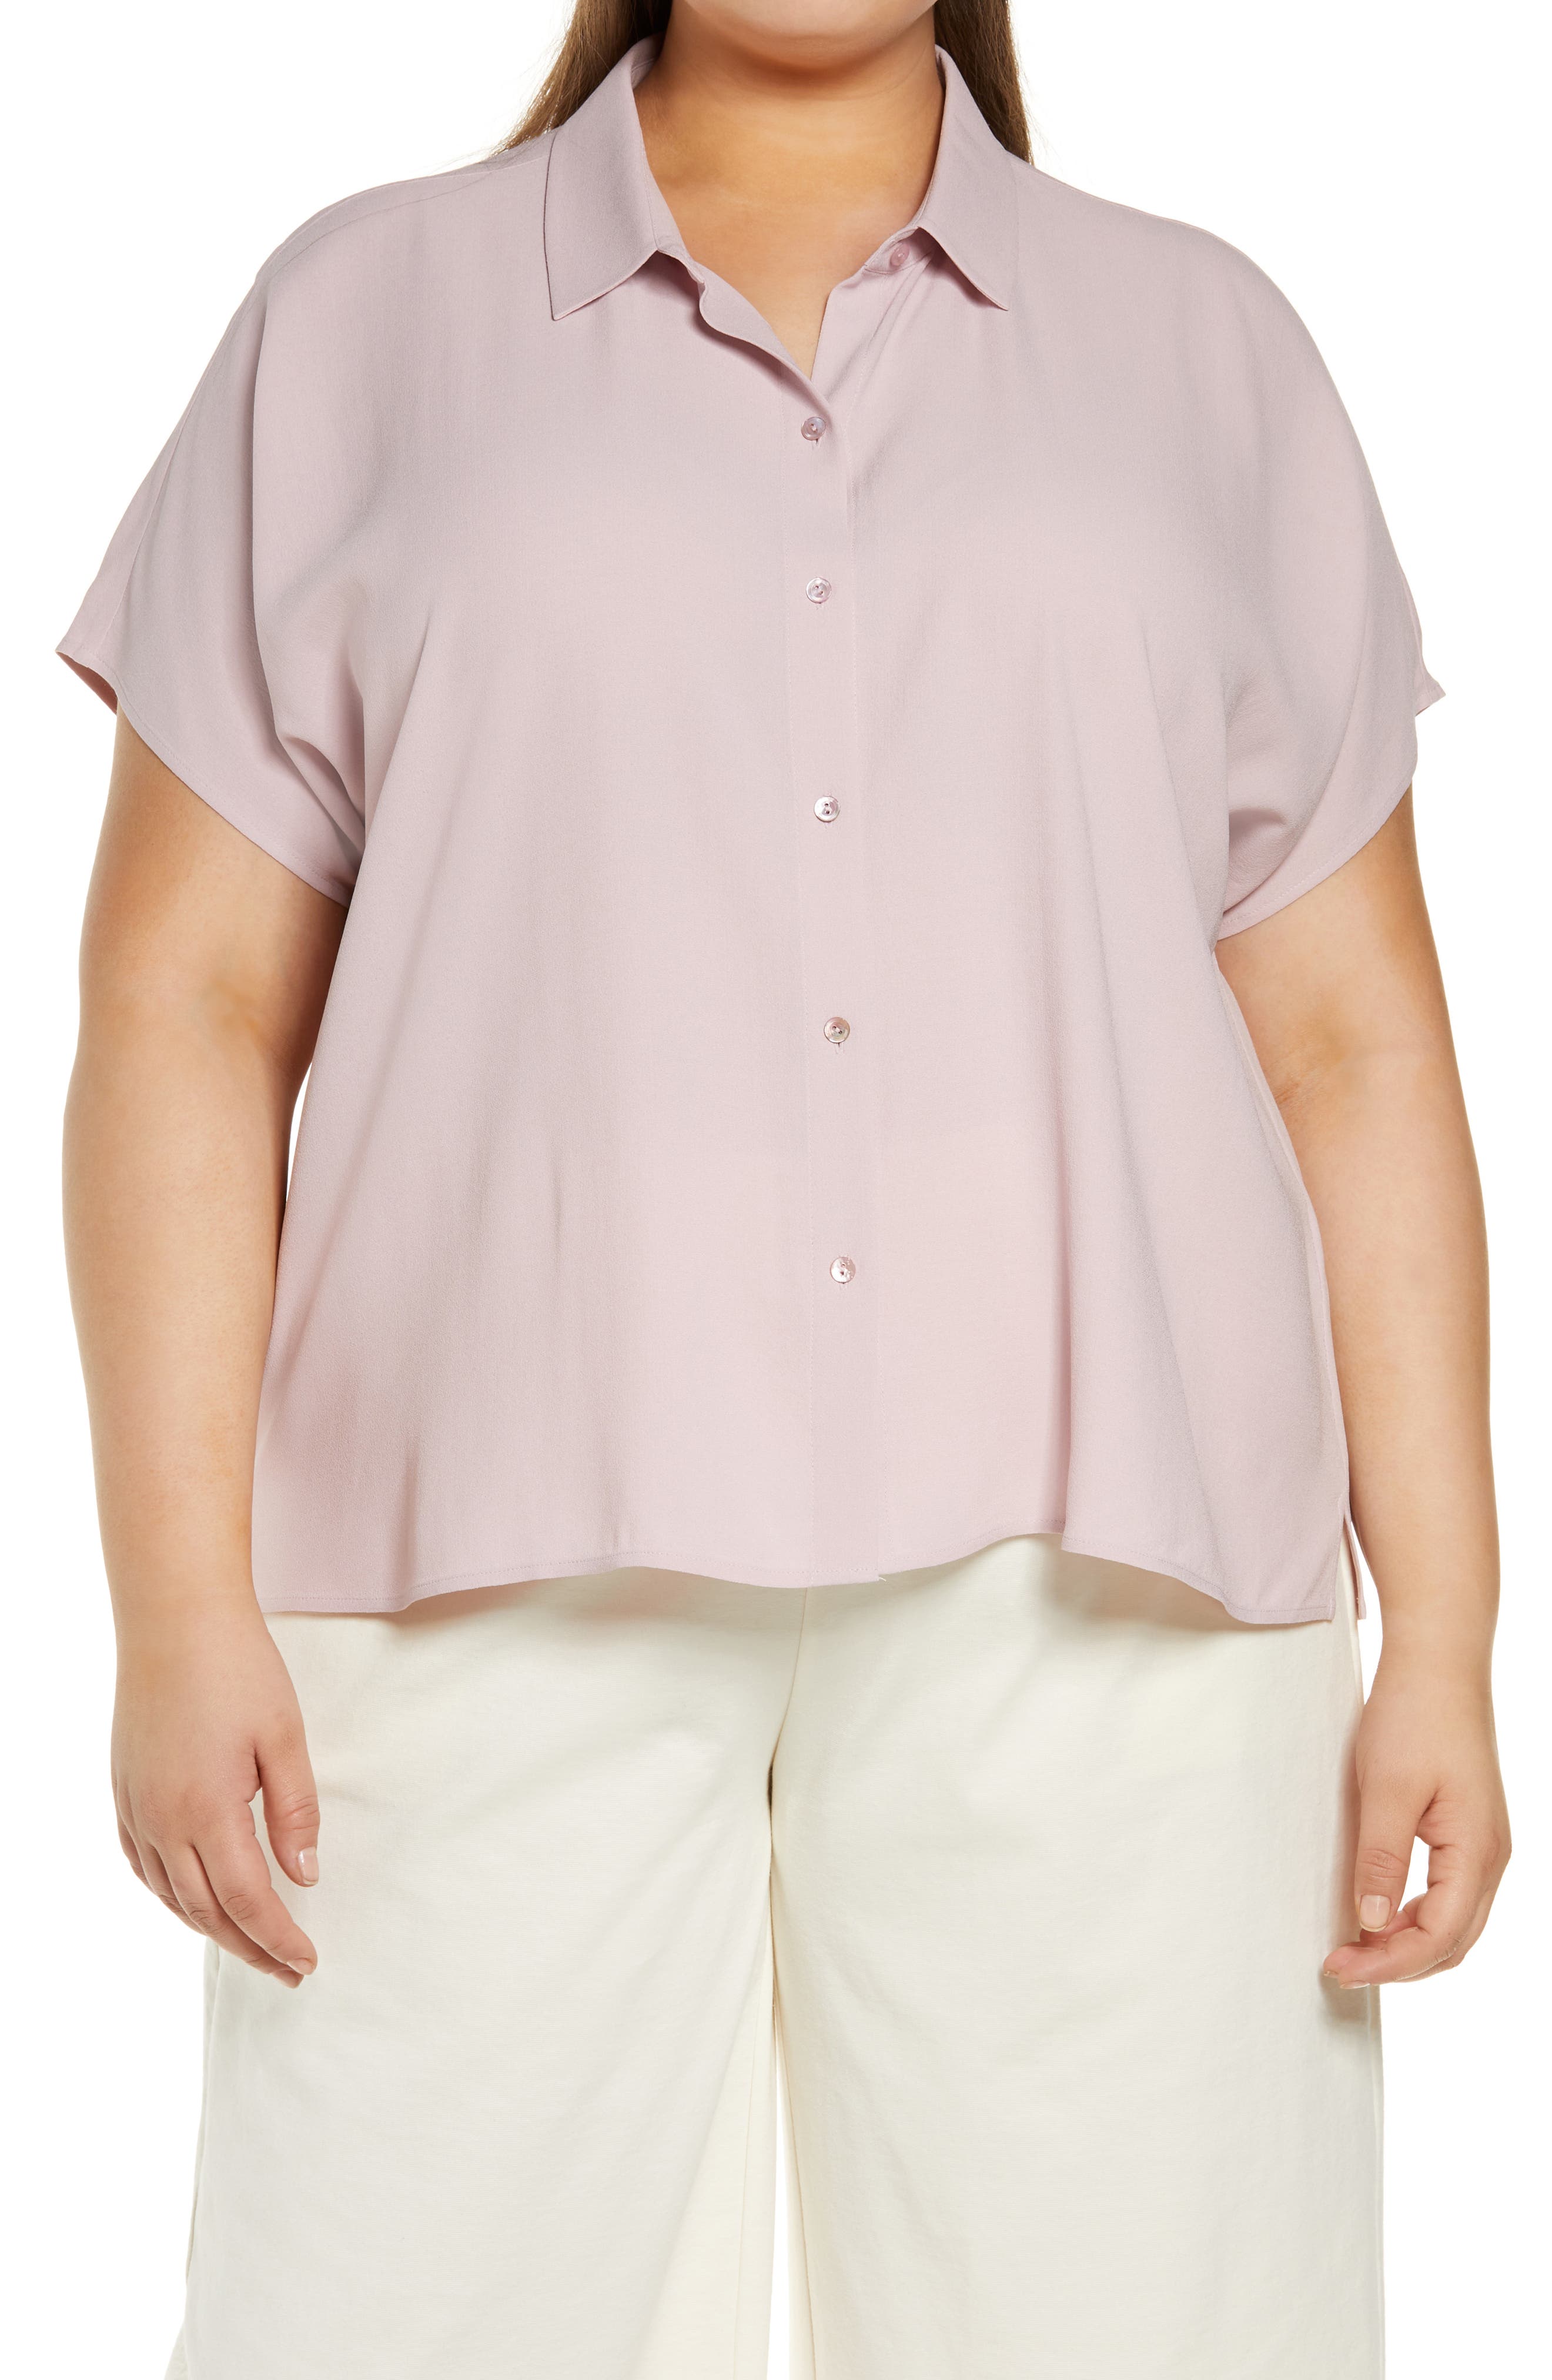 100% Silk Plus-Size Tops for Women ...